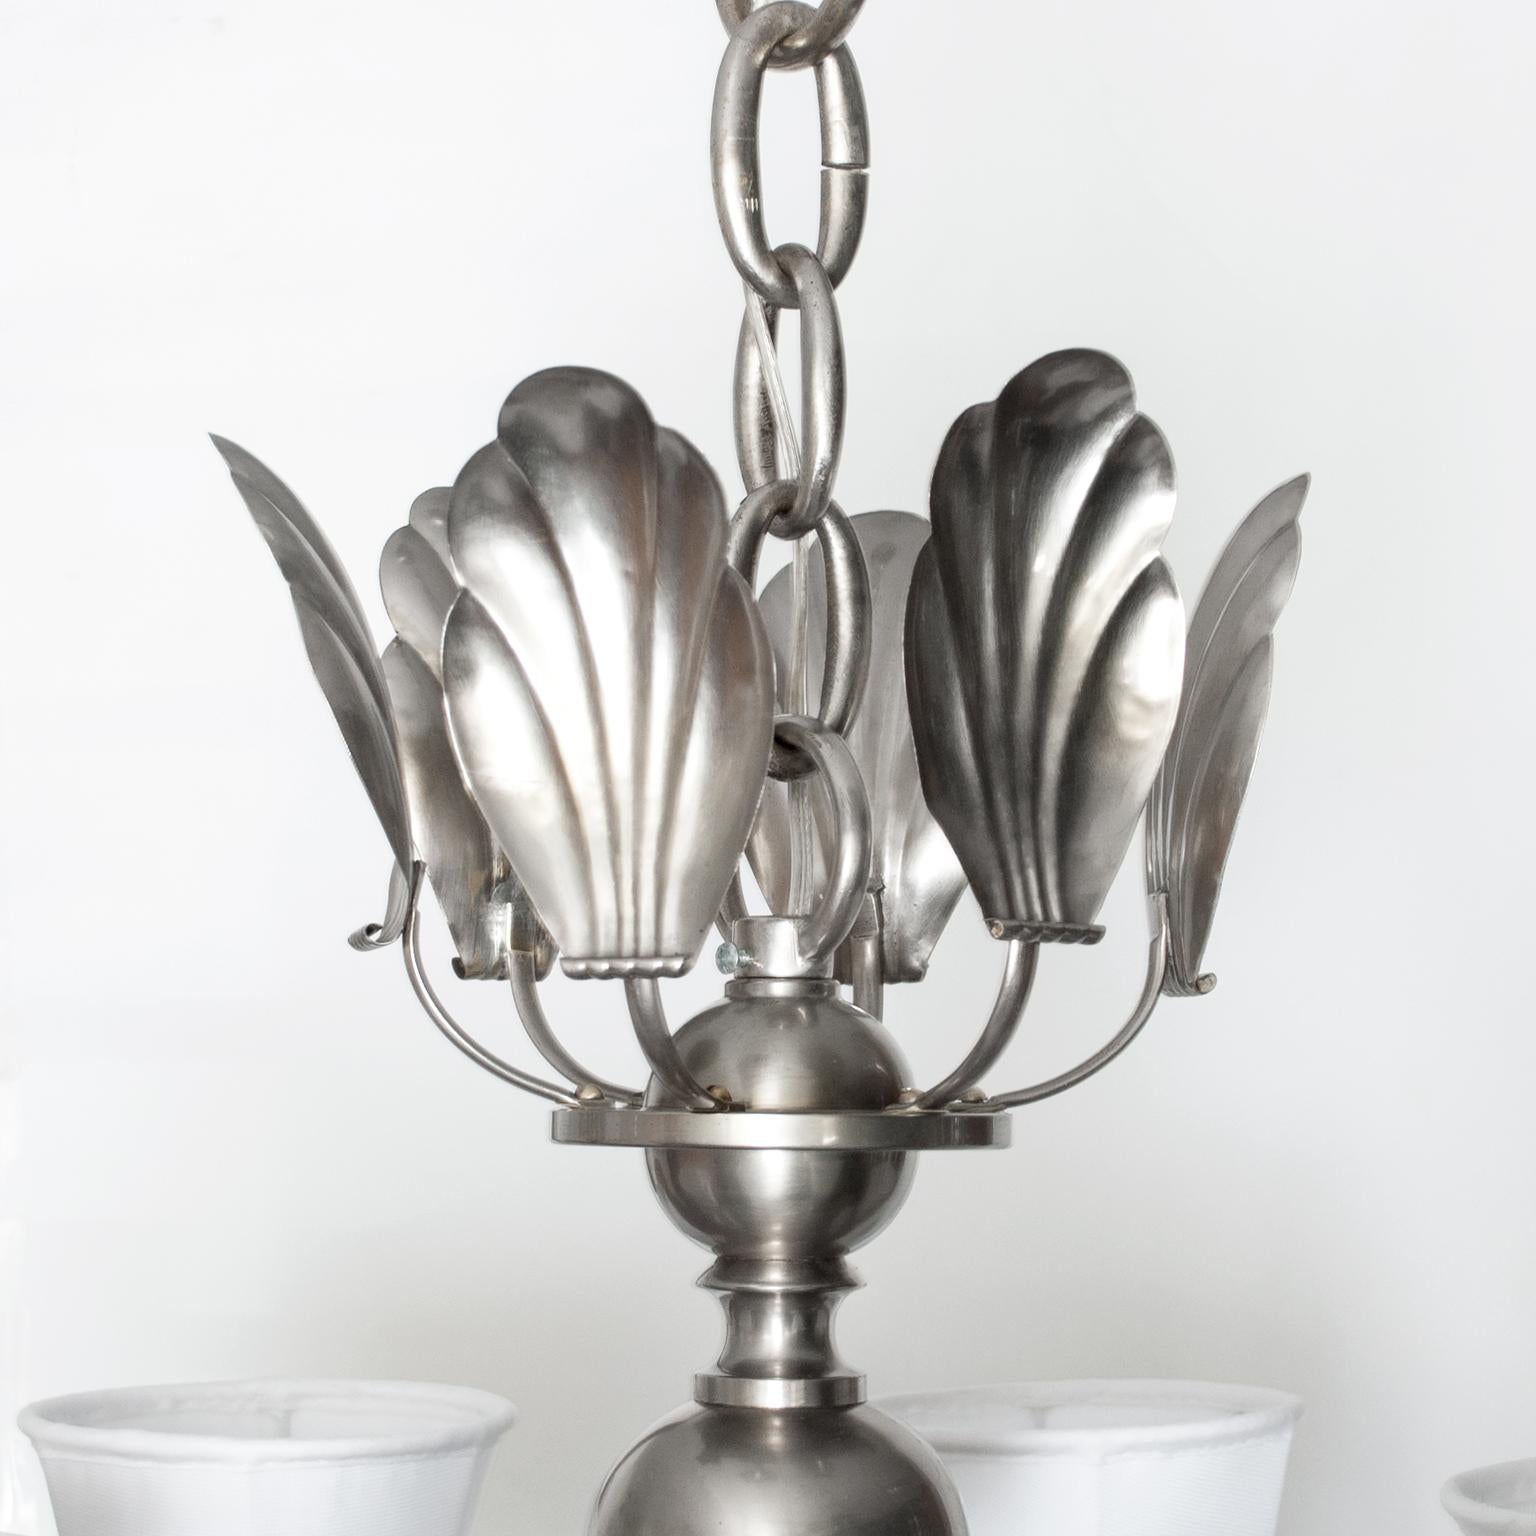 Svenskt Tenn Large 1920's Scandinavian Modern Chandelier with 12 Arms In Good Condition For Sale In New York, NY